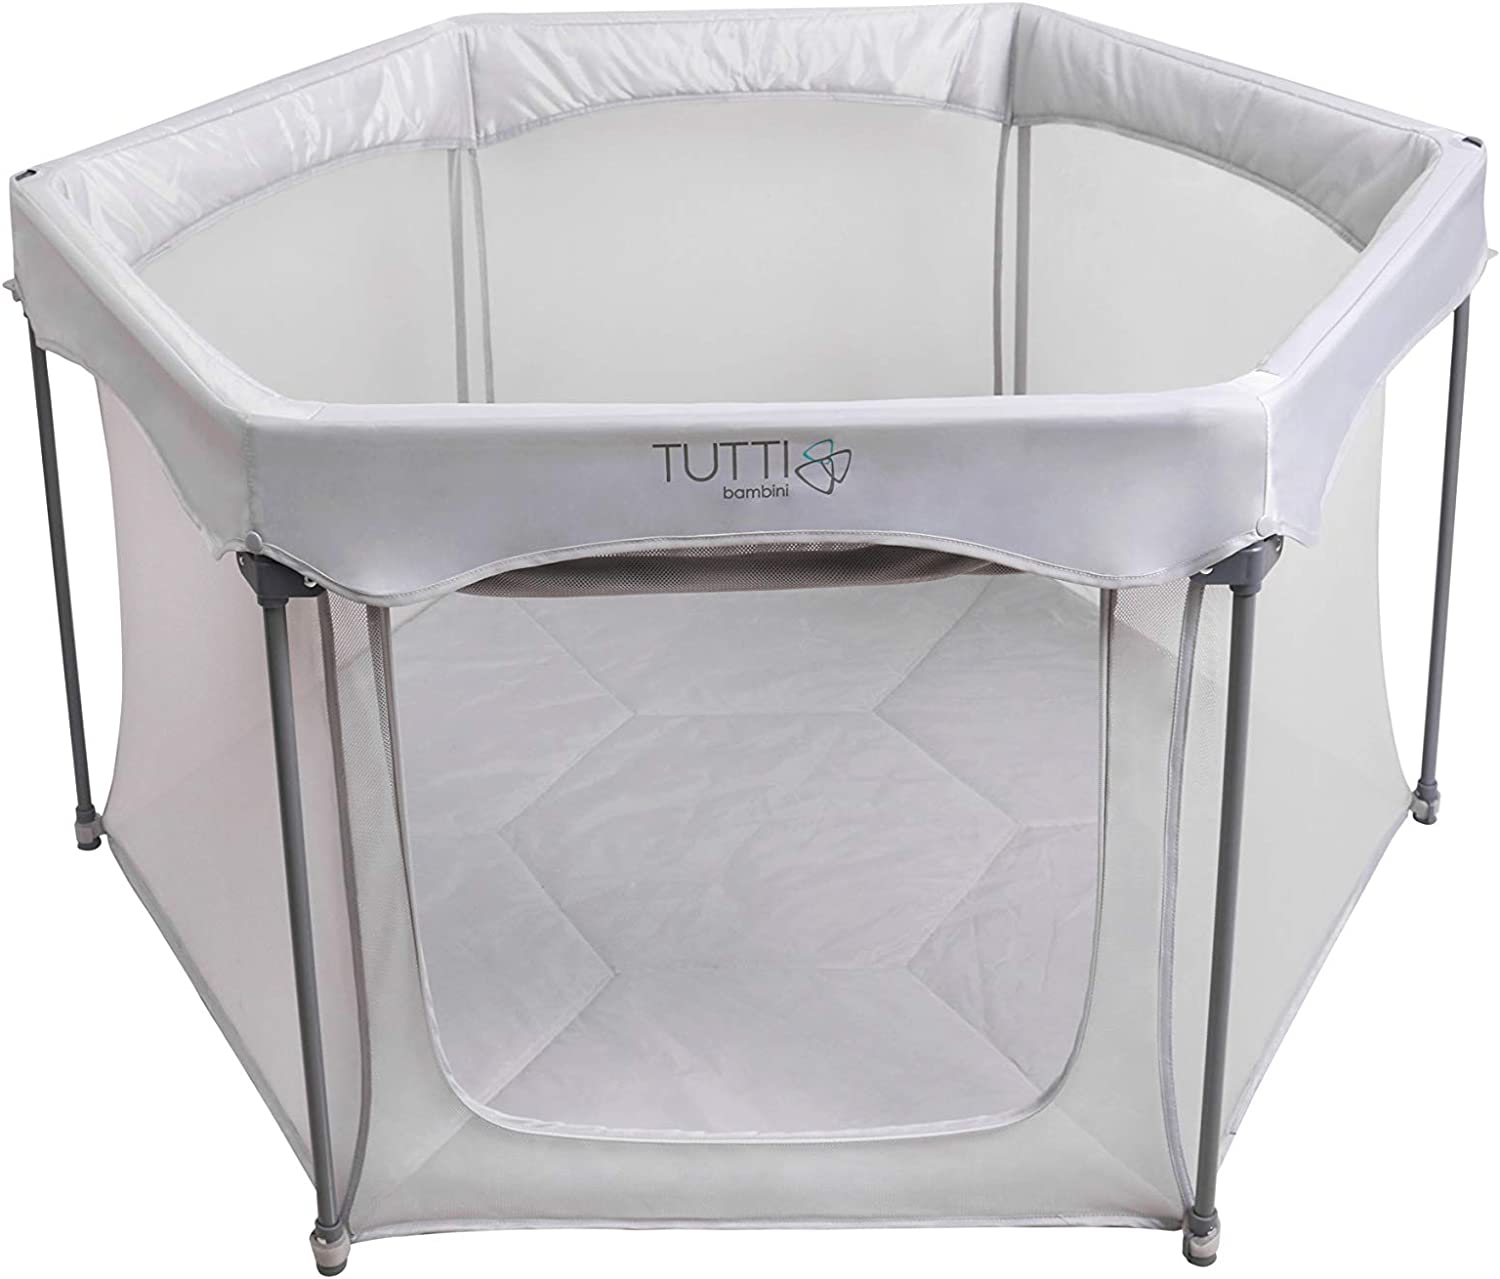 Tutti Bambini Hexa Playpen in Grey with Travel Carry Case